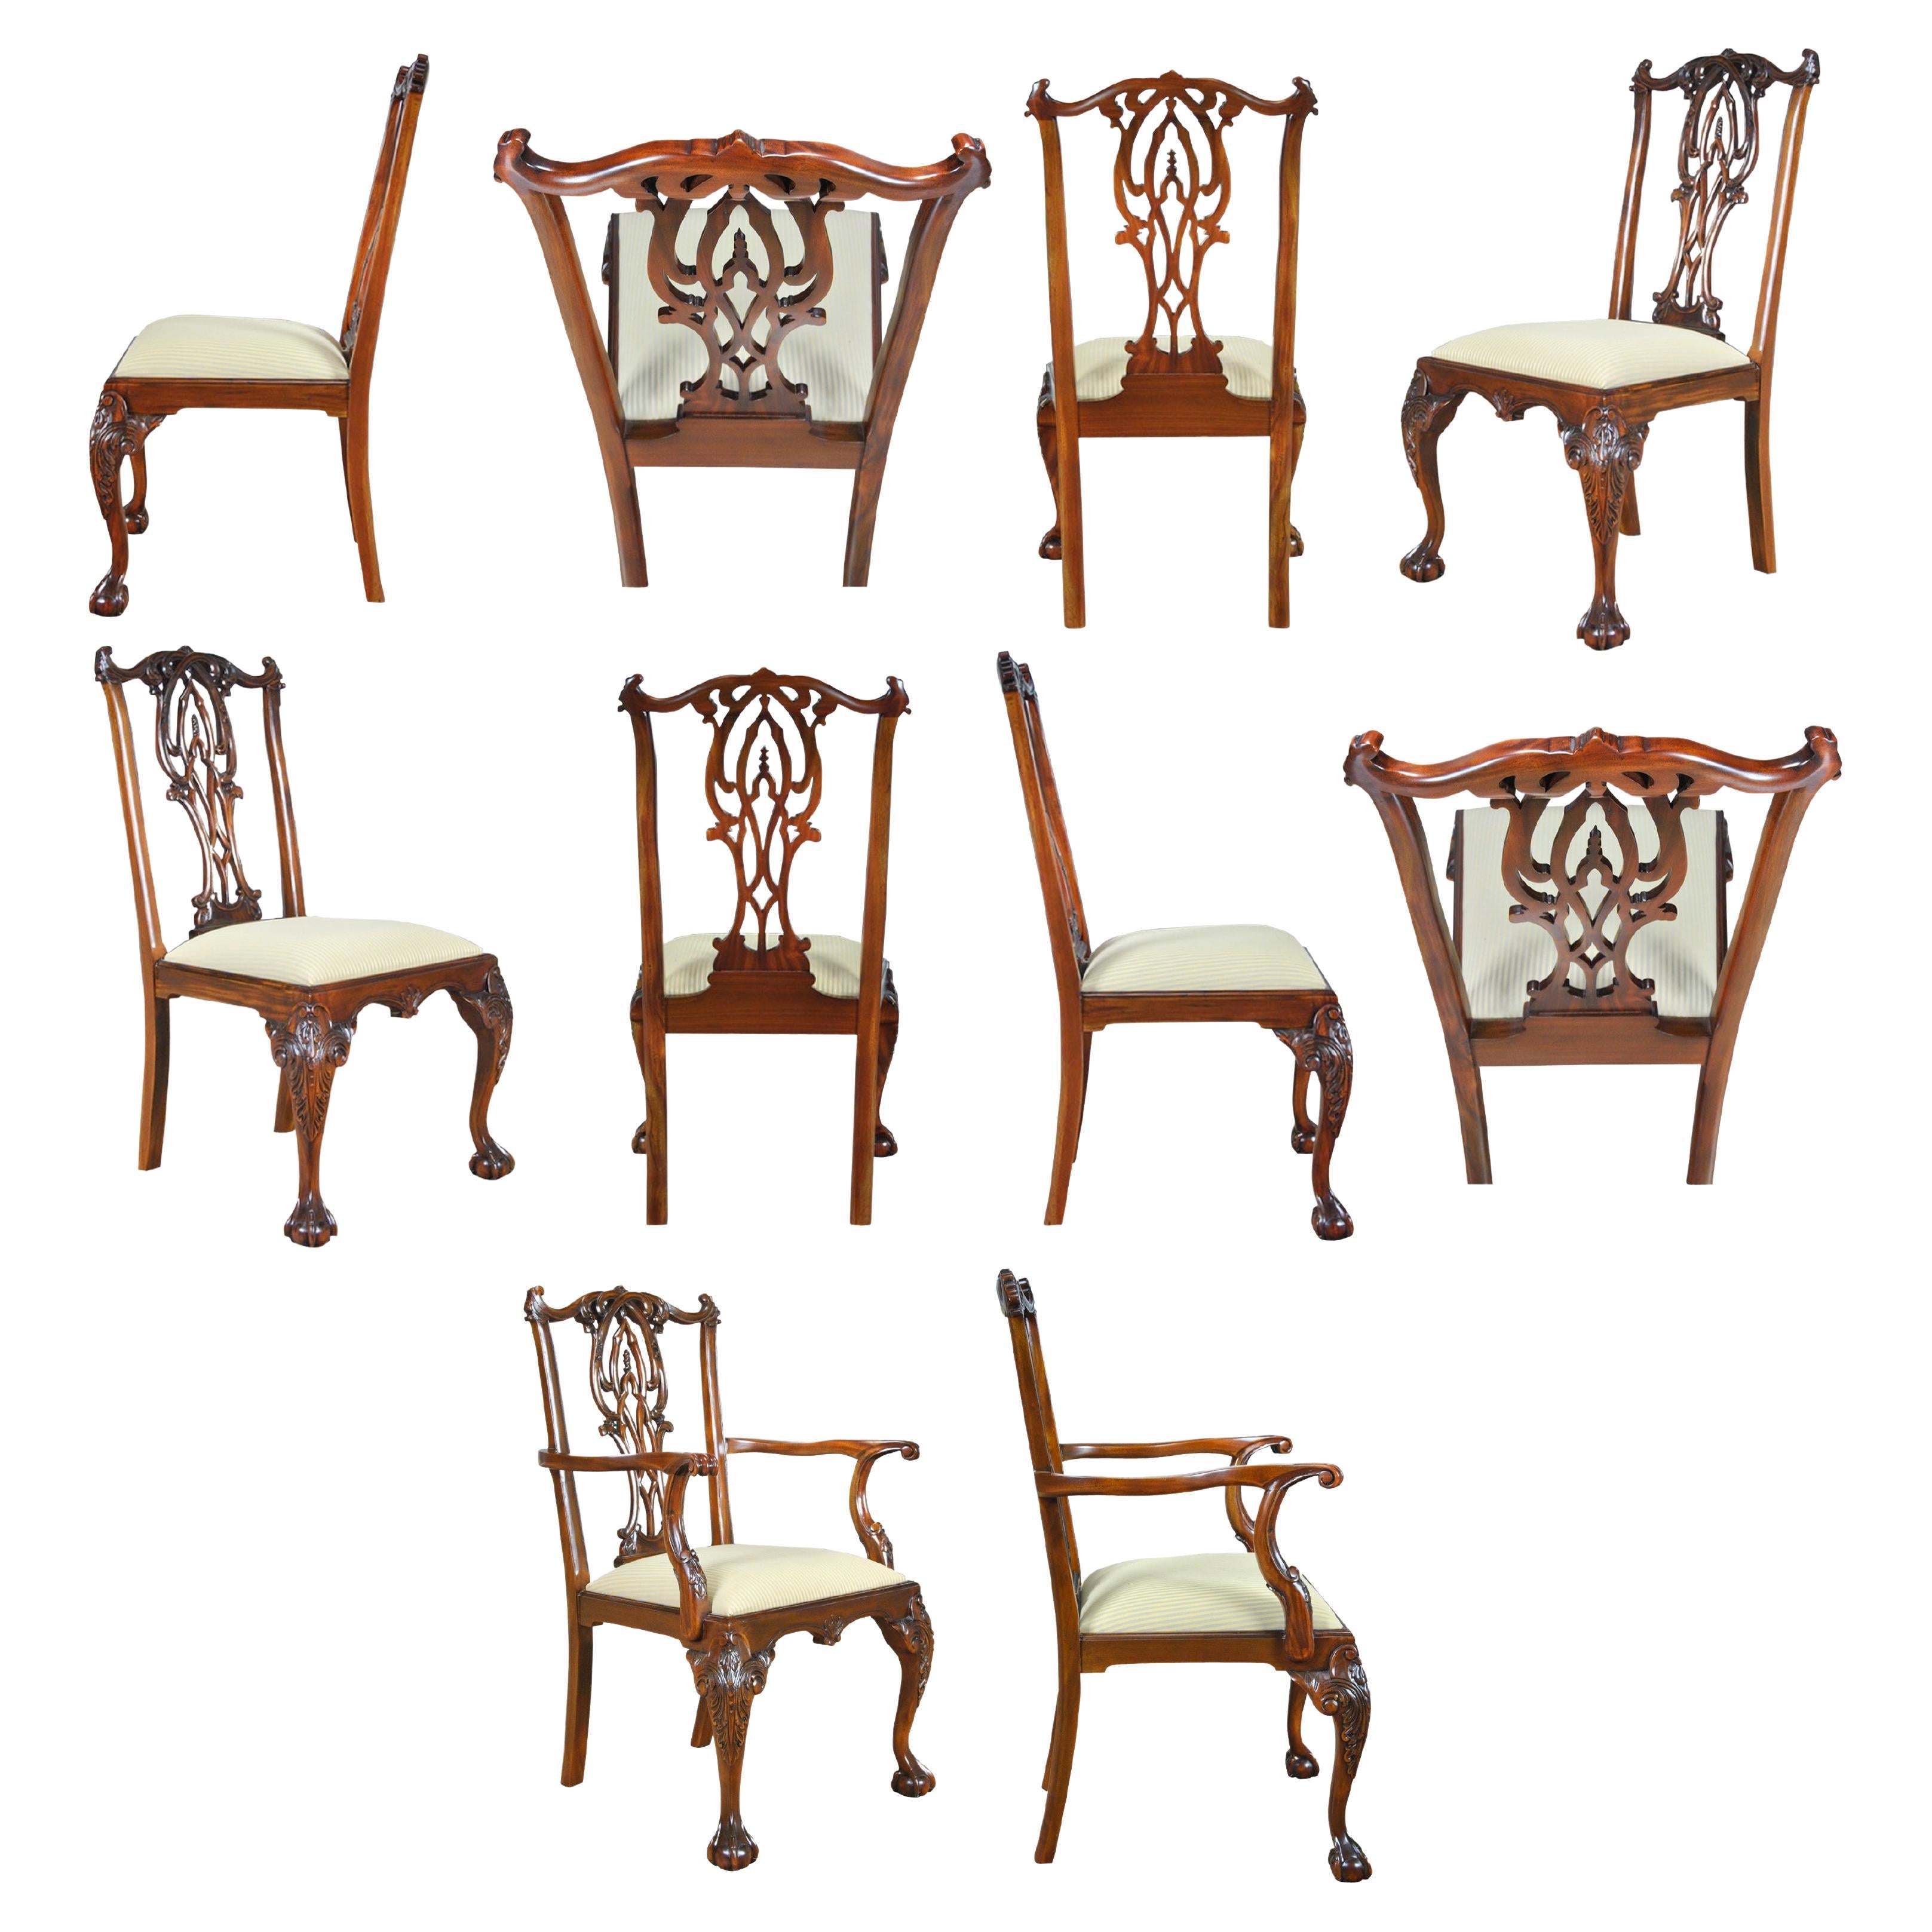 Flame Back Chippendale Chairs, Set of 10